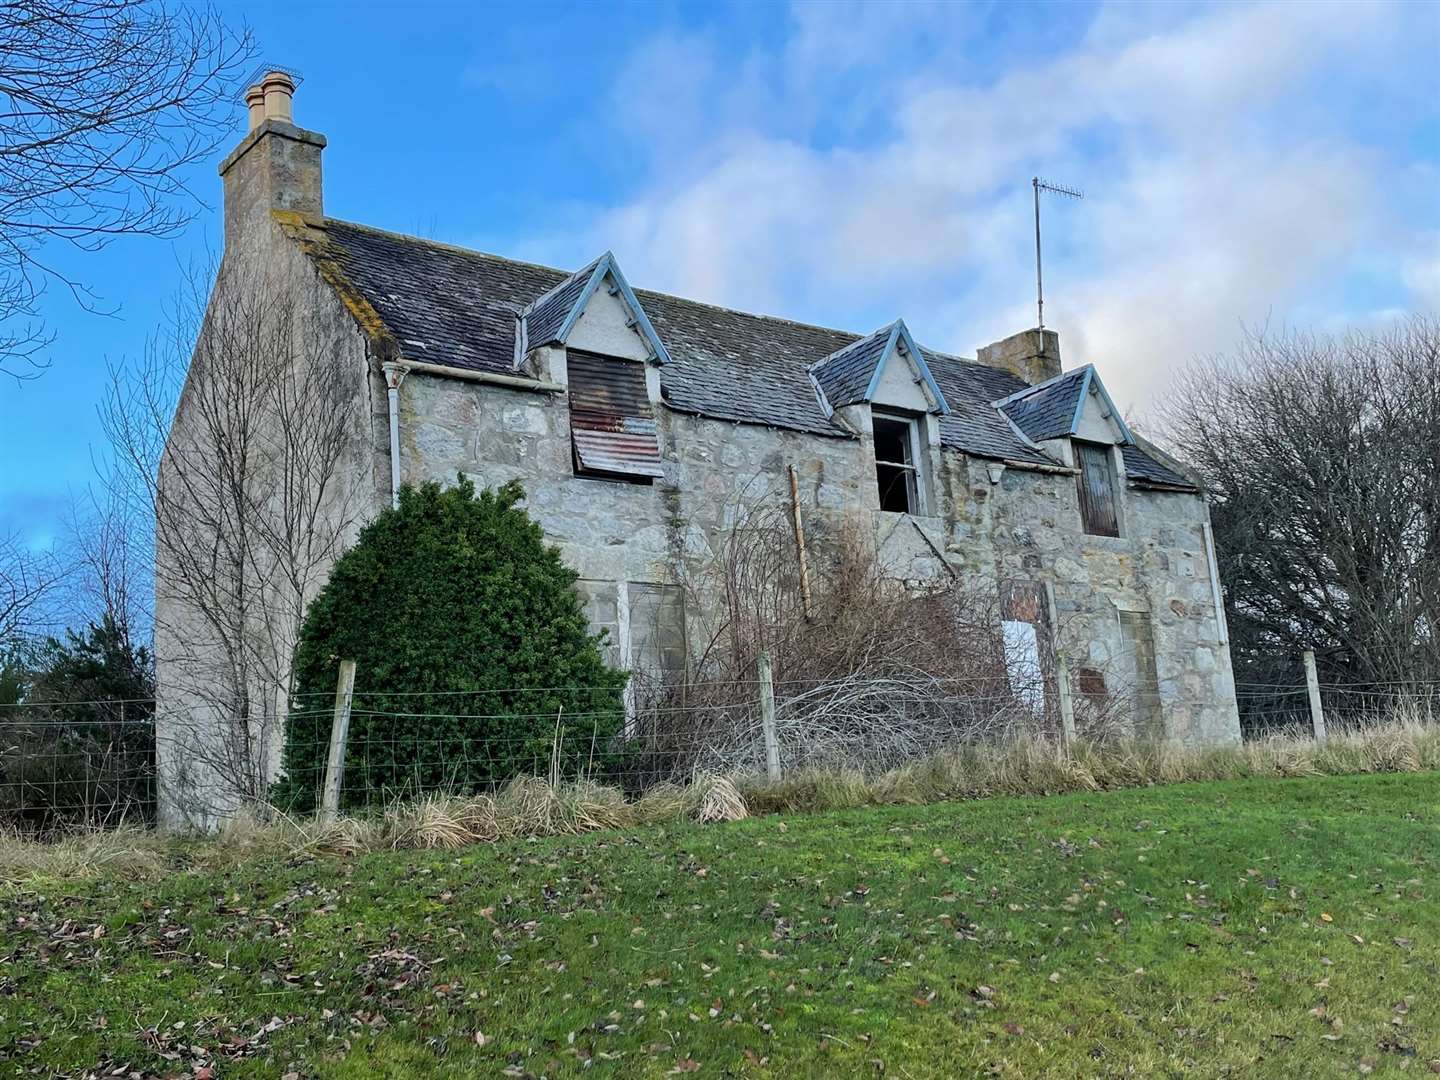 The old Dalfaber Farmhouse which has been derelict for many years and overlooks the first tee at Spey Valley golf course.